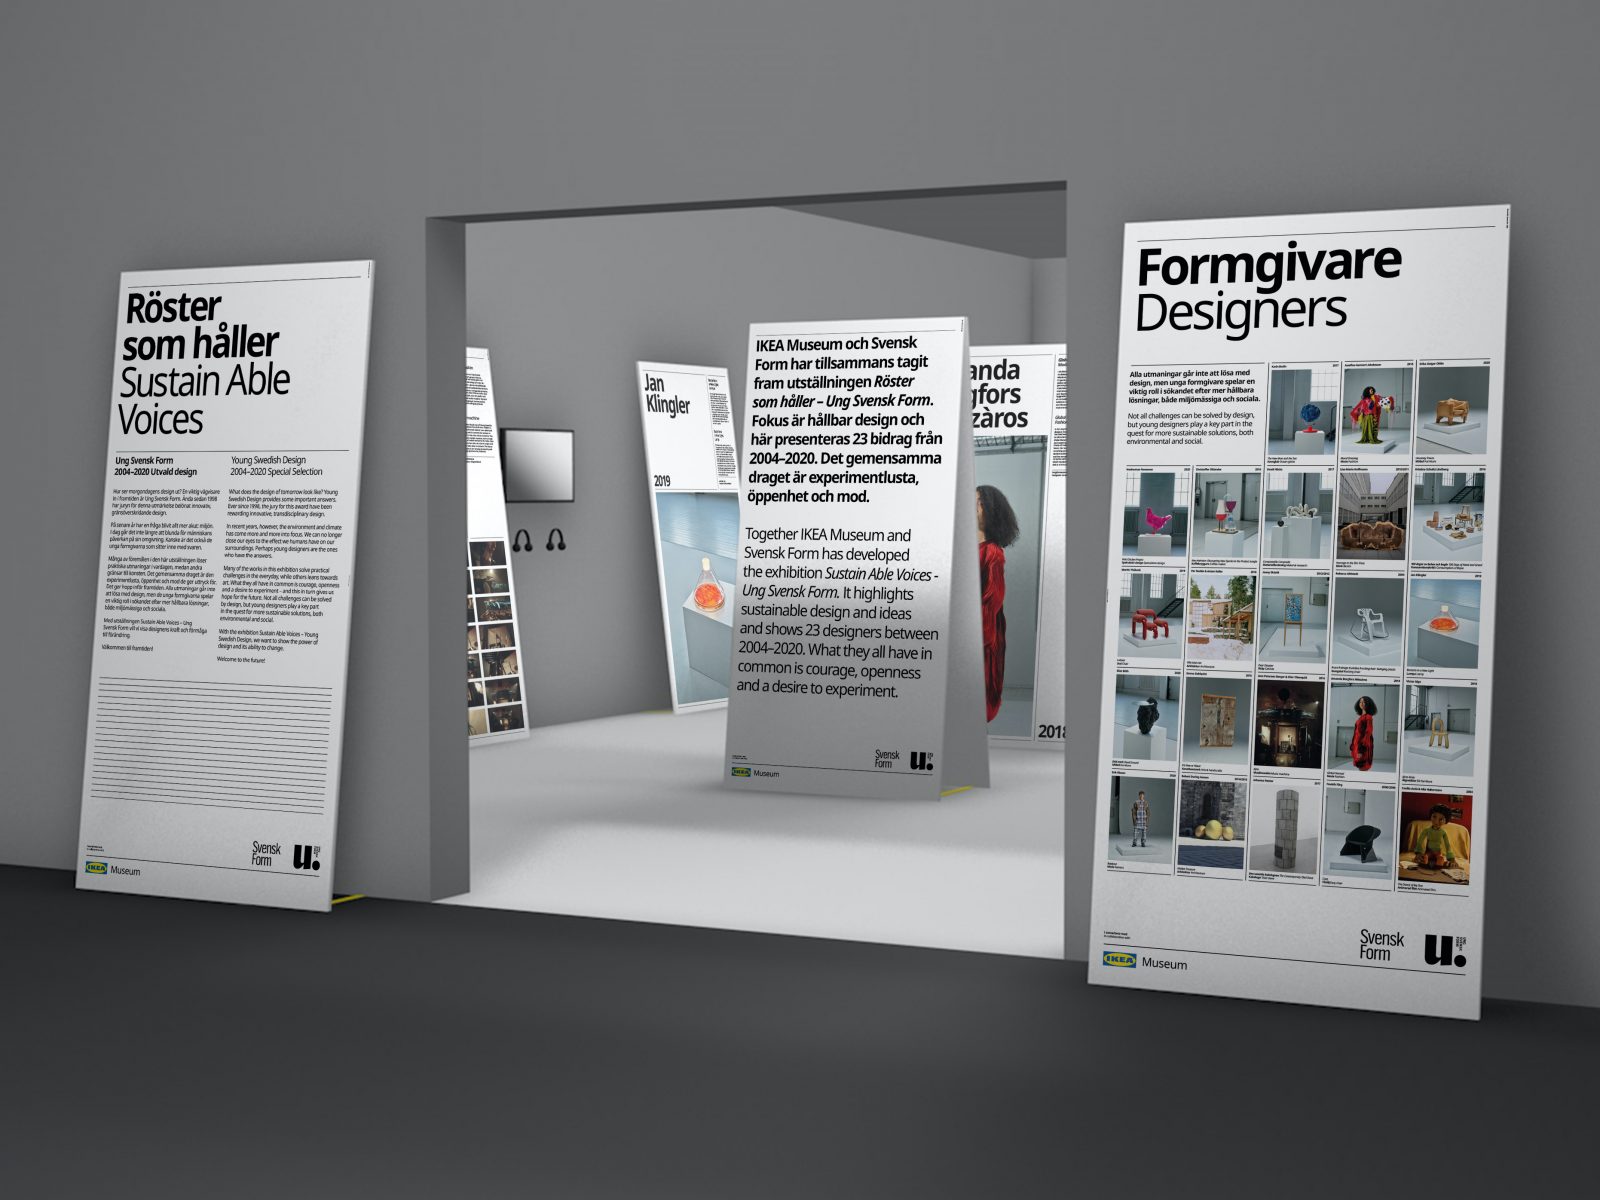 3d rendition showing exhibition space with big posters with text and images.